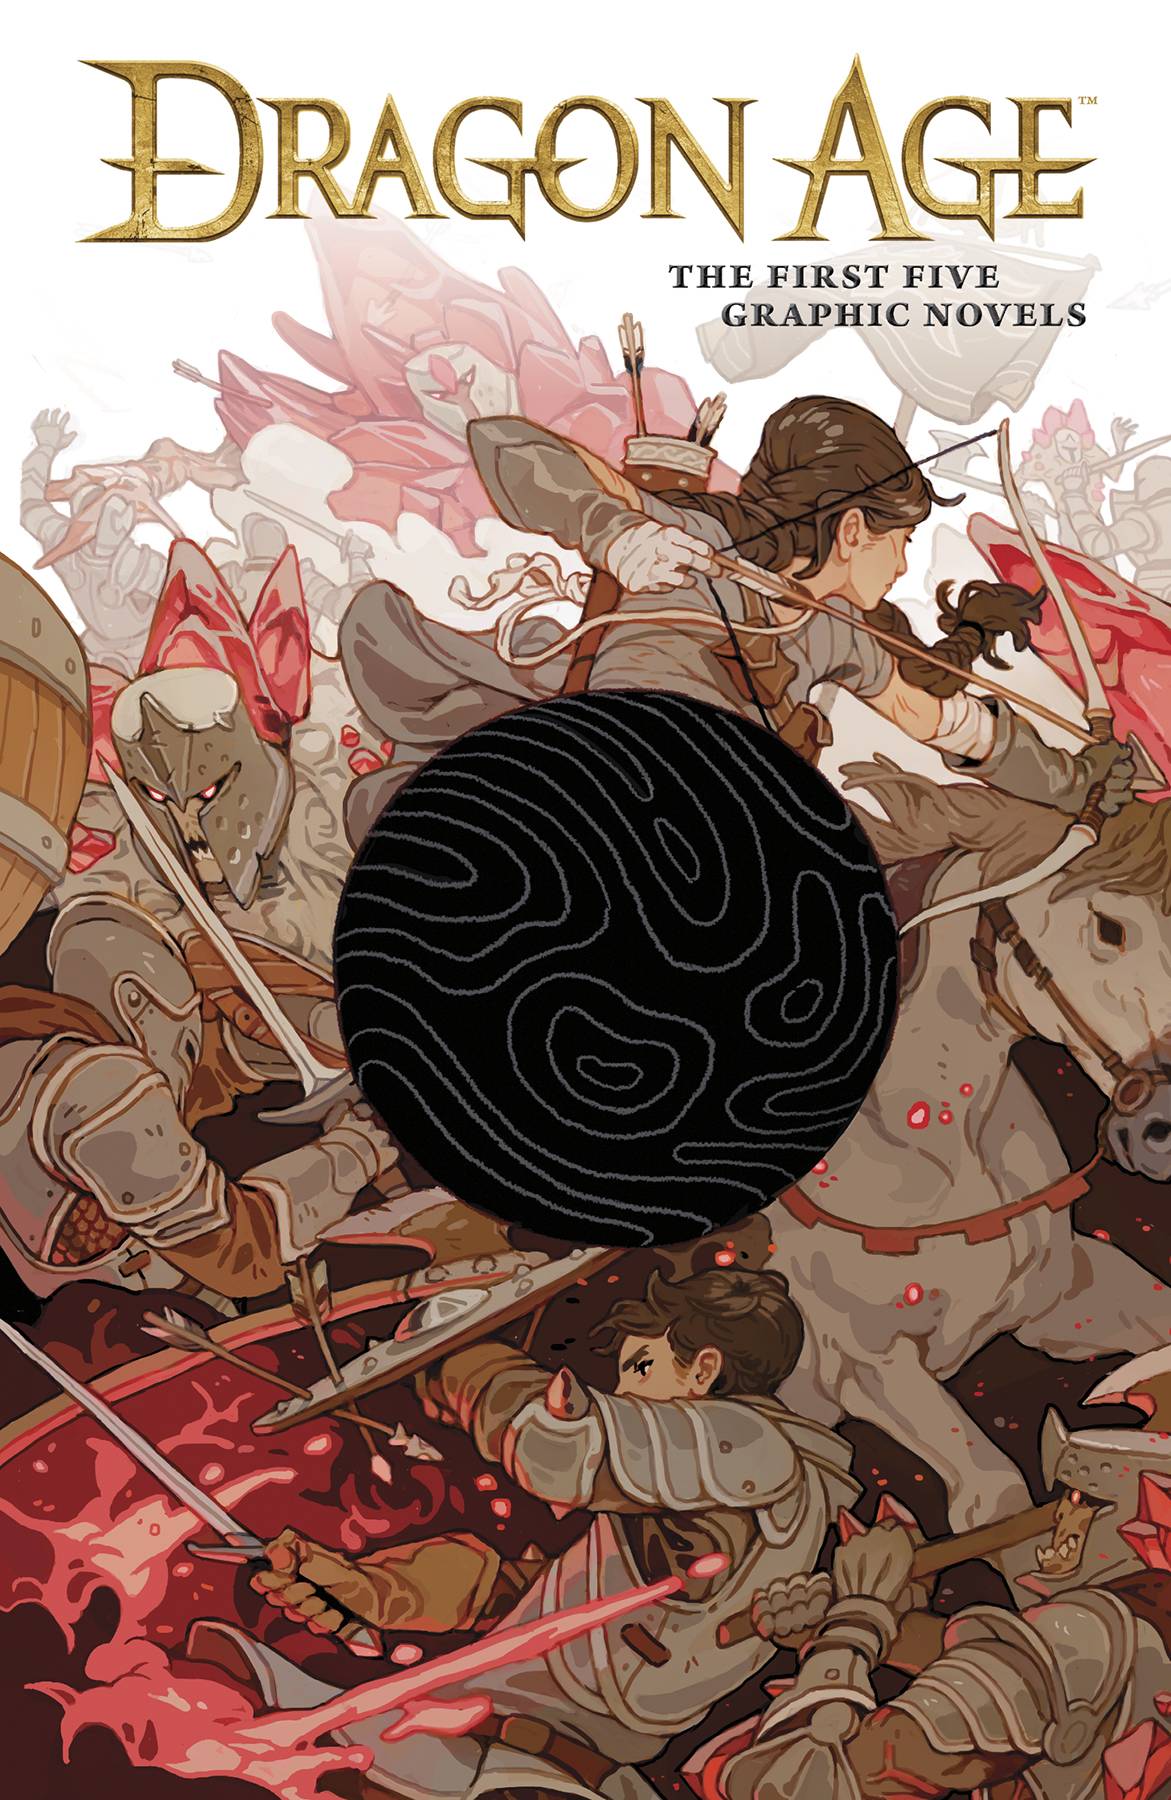 A swirled black orb blocks out the center of an image of a war, an archer on horseback fighting next to a helmeted knight who is sprouting red crystals.